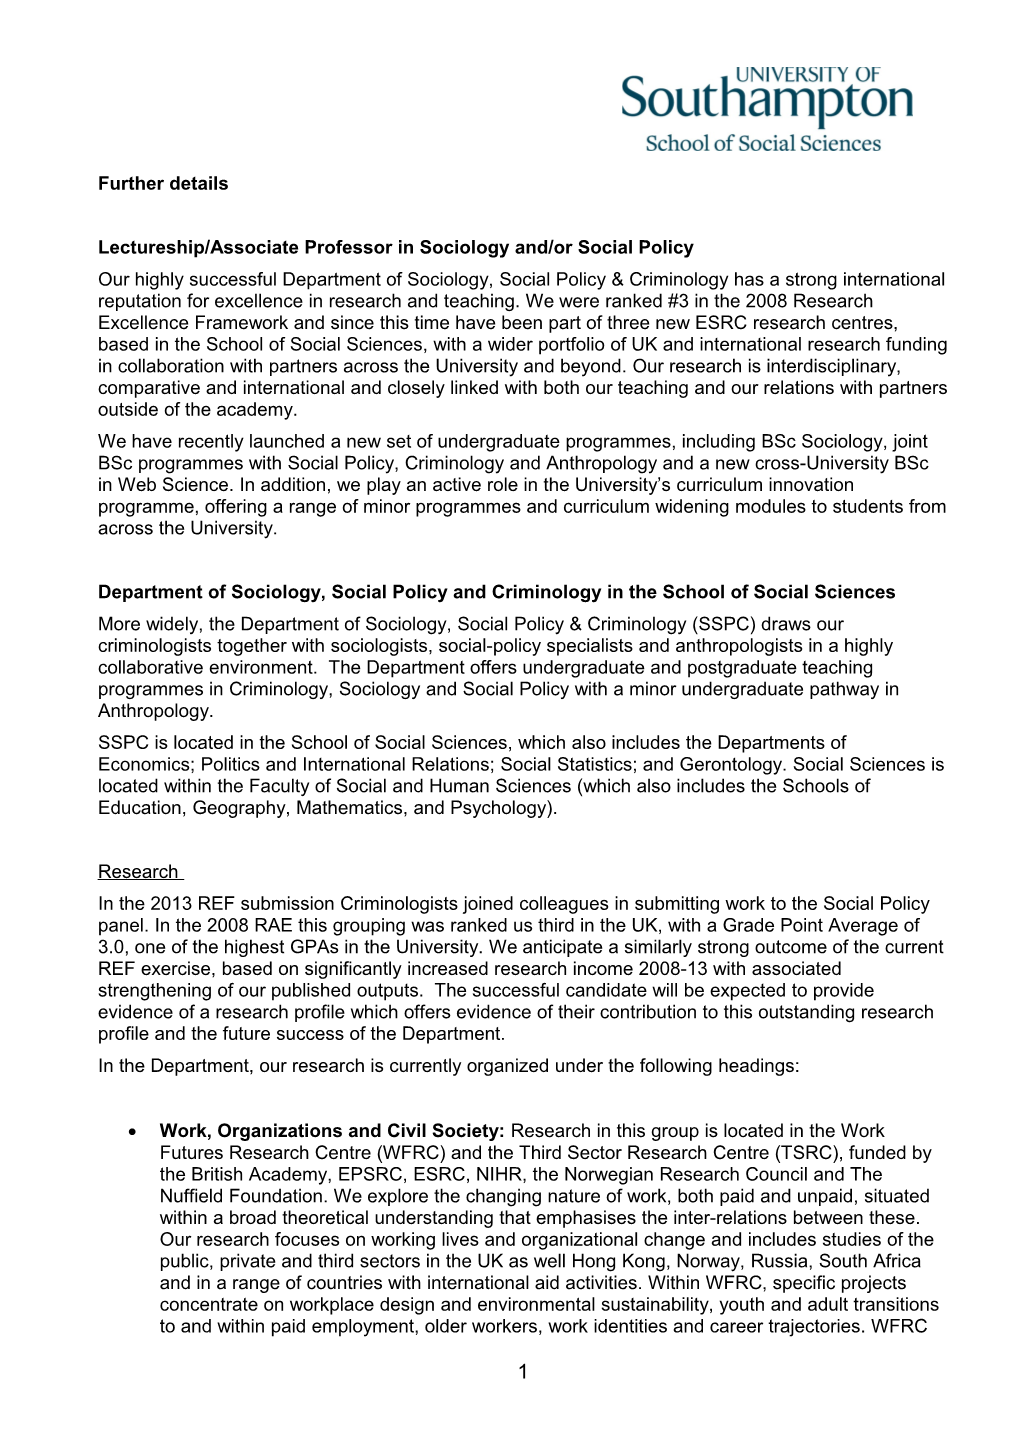 Lectureship/Associate Professor in Sociology And/Or Social Policy